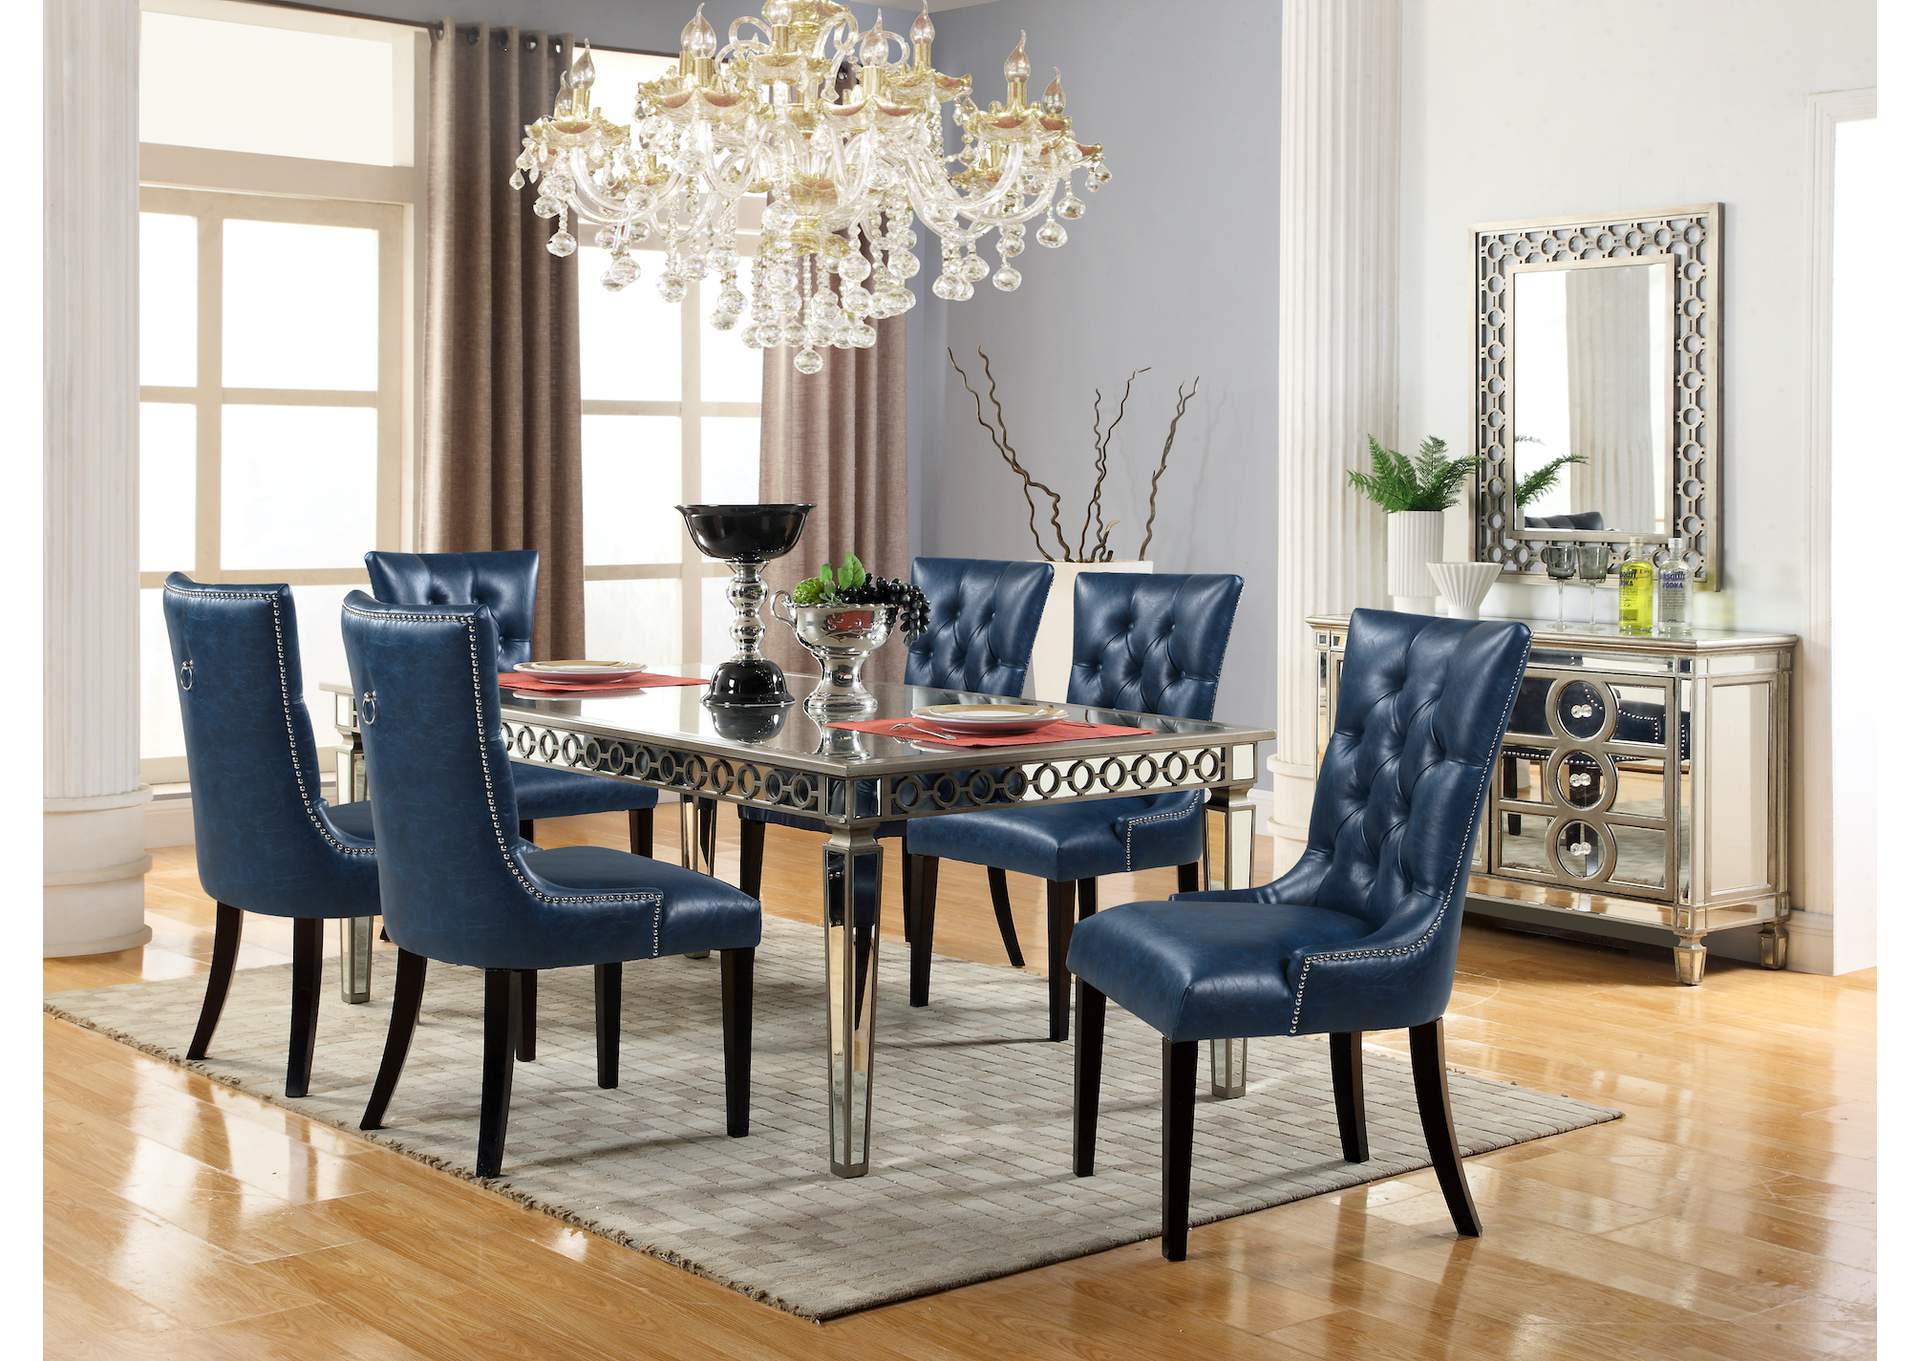 Brooklyn Silver 7 Piece Dining Set -Table W/ 6 Side Chairs,Cosmos Furniture